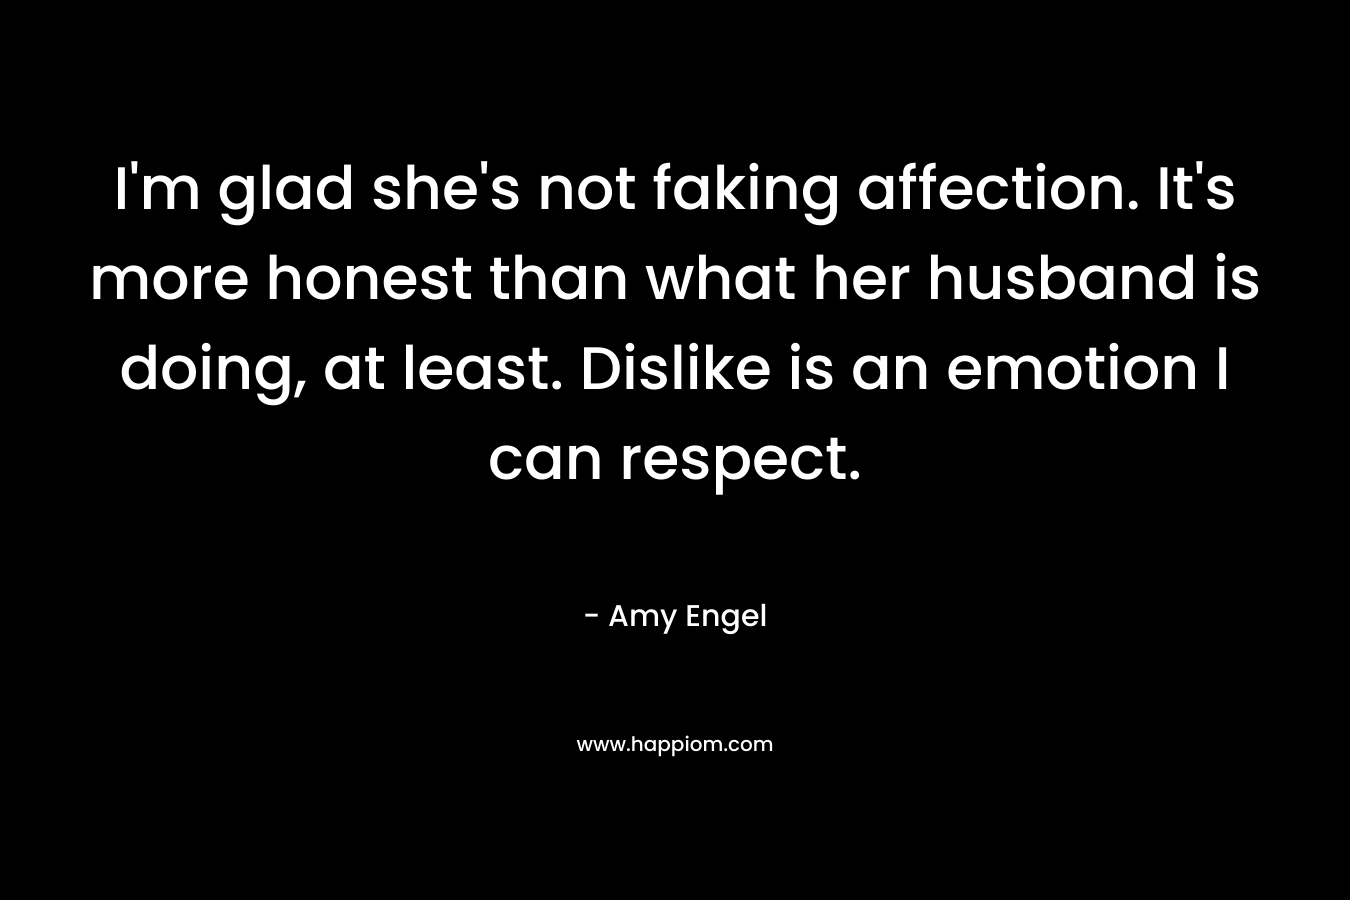 I'm glad she's not faking affection. It's more honest than what her husband is doing, at least. Dislike is an emotion I can respect.